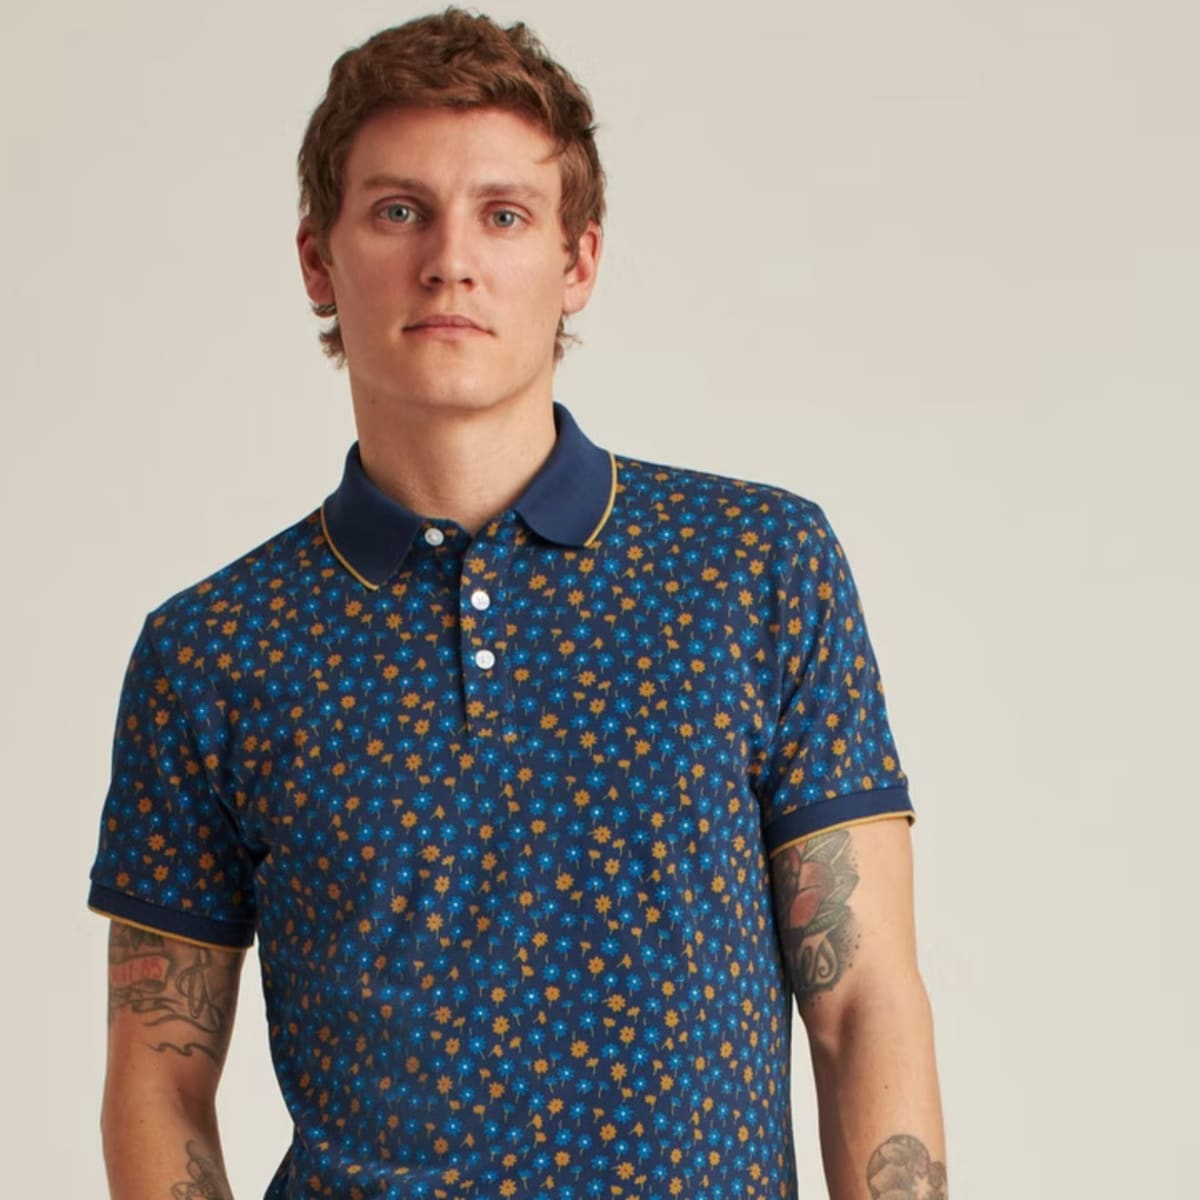 Men's Polo Shirts: 15 Top Picks for Summer 2023